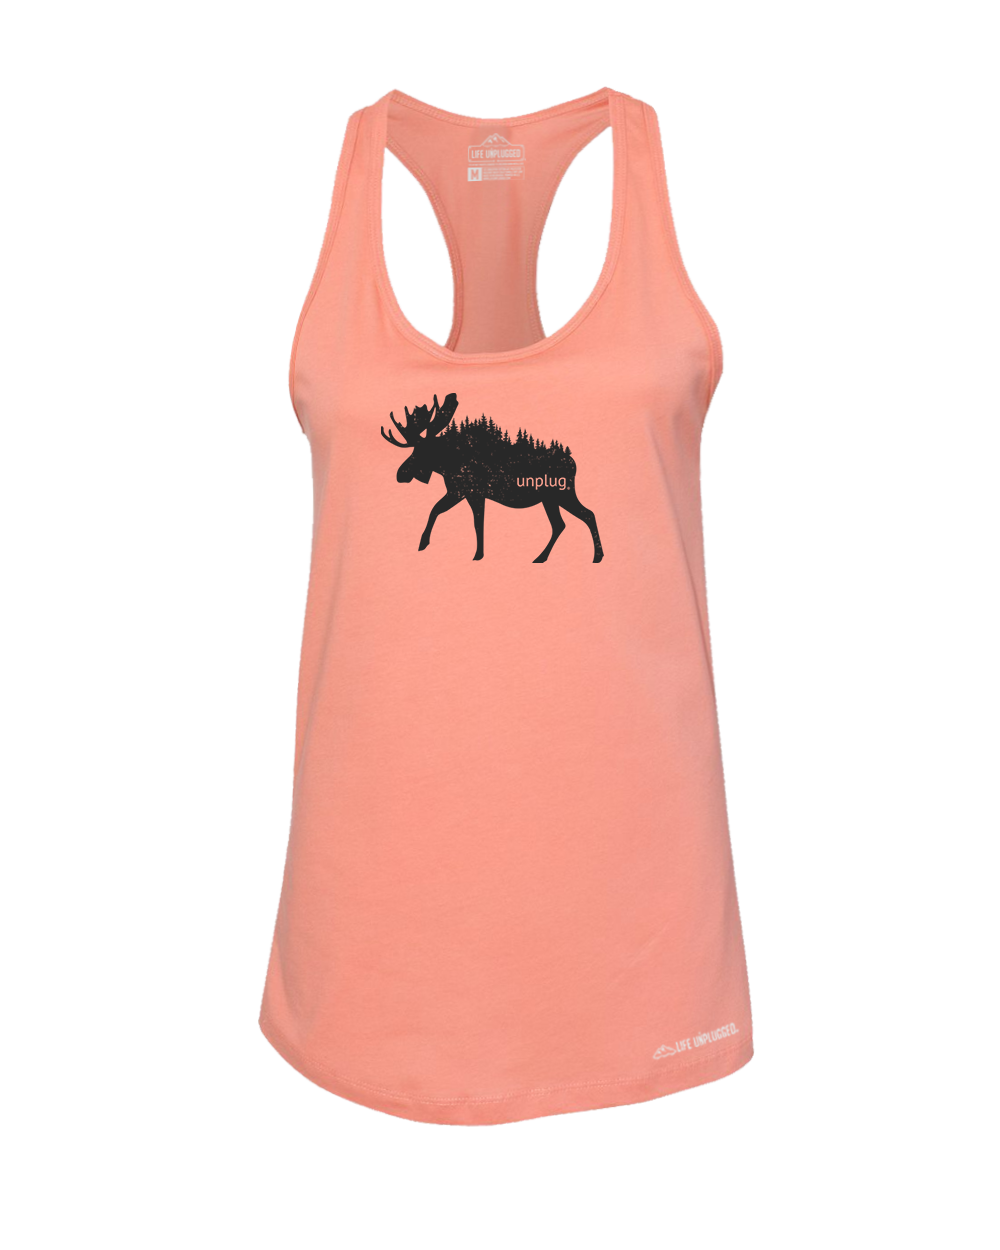 Moose In The Trees Premium Women's Relaxed Fit Racerback Tank Top - Life Unplugged